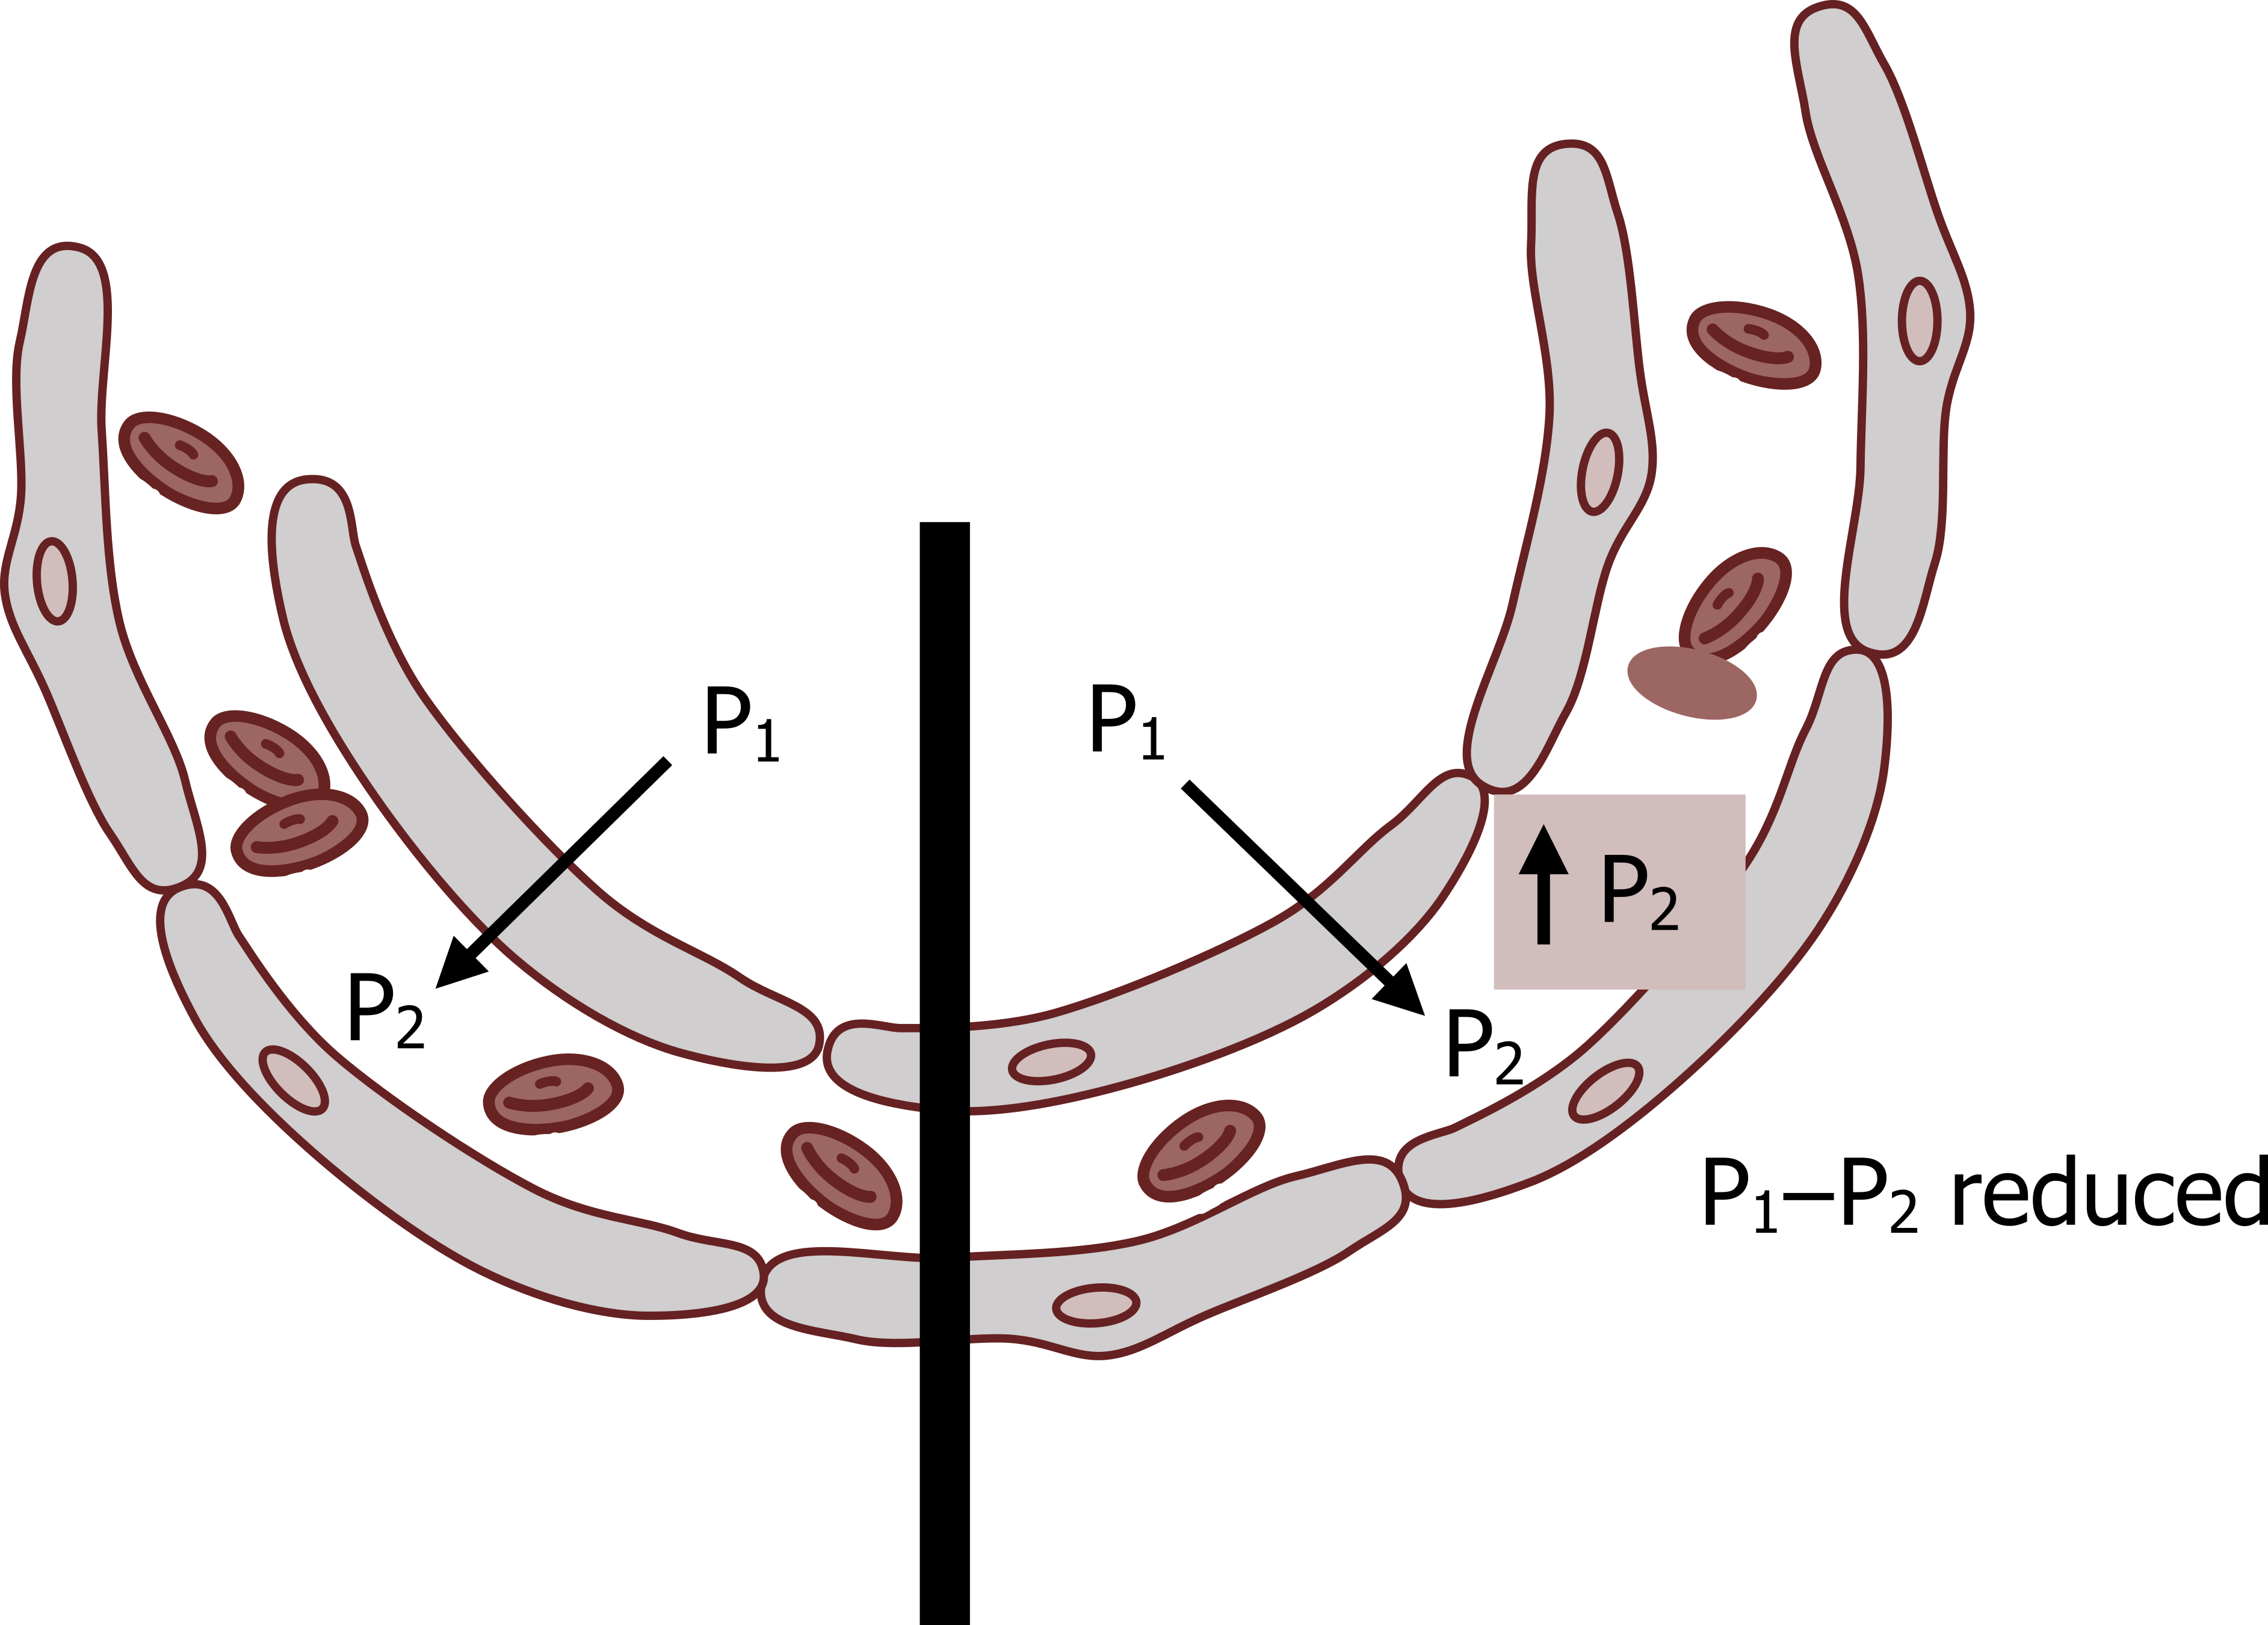 The image shows a cartoon of a capillary passing a single alveolus. A black line separates the structure into two halves to depict diffusion limitation to the left of the line and perfusion limitation to the right. On both sides, P1 is written inside the alveolus with P2 inside the capillary. An arrow goes from P1 to P2. On the right side a box with an up-arrow and P2 is include inside the capillary and there is an annotation that P1-P2 is reduced.